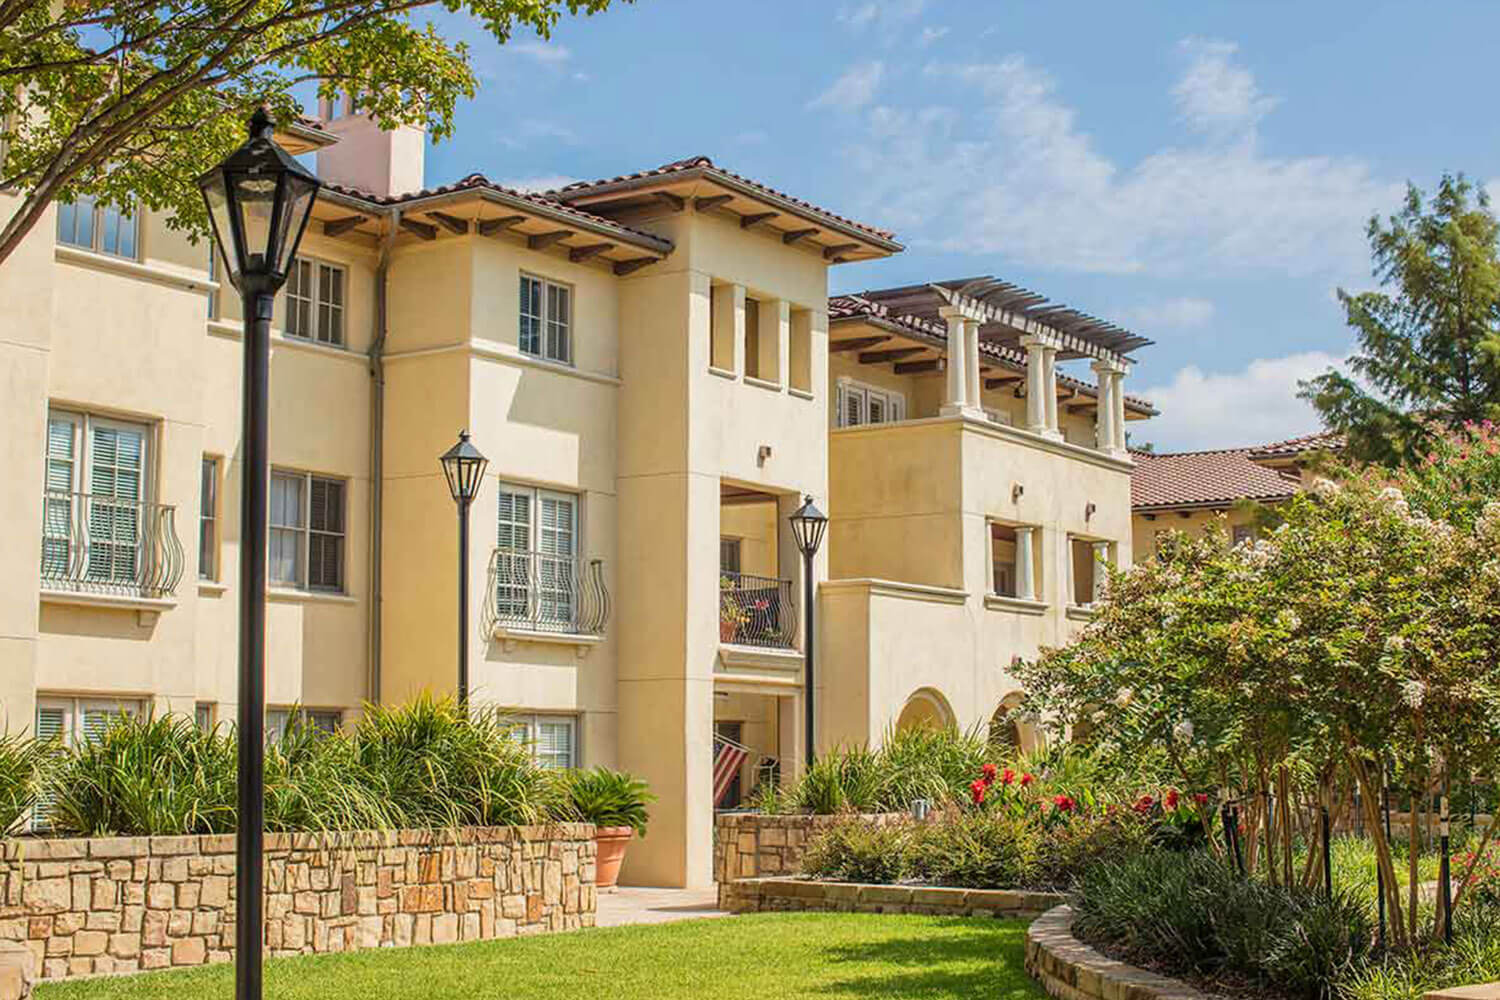 Large 3 story off white stucco senior living apartment building with beautifully landscaped courtyard with raised flowerbeds full of flora